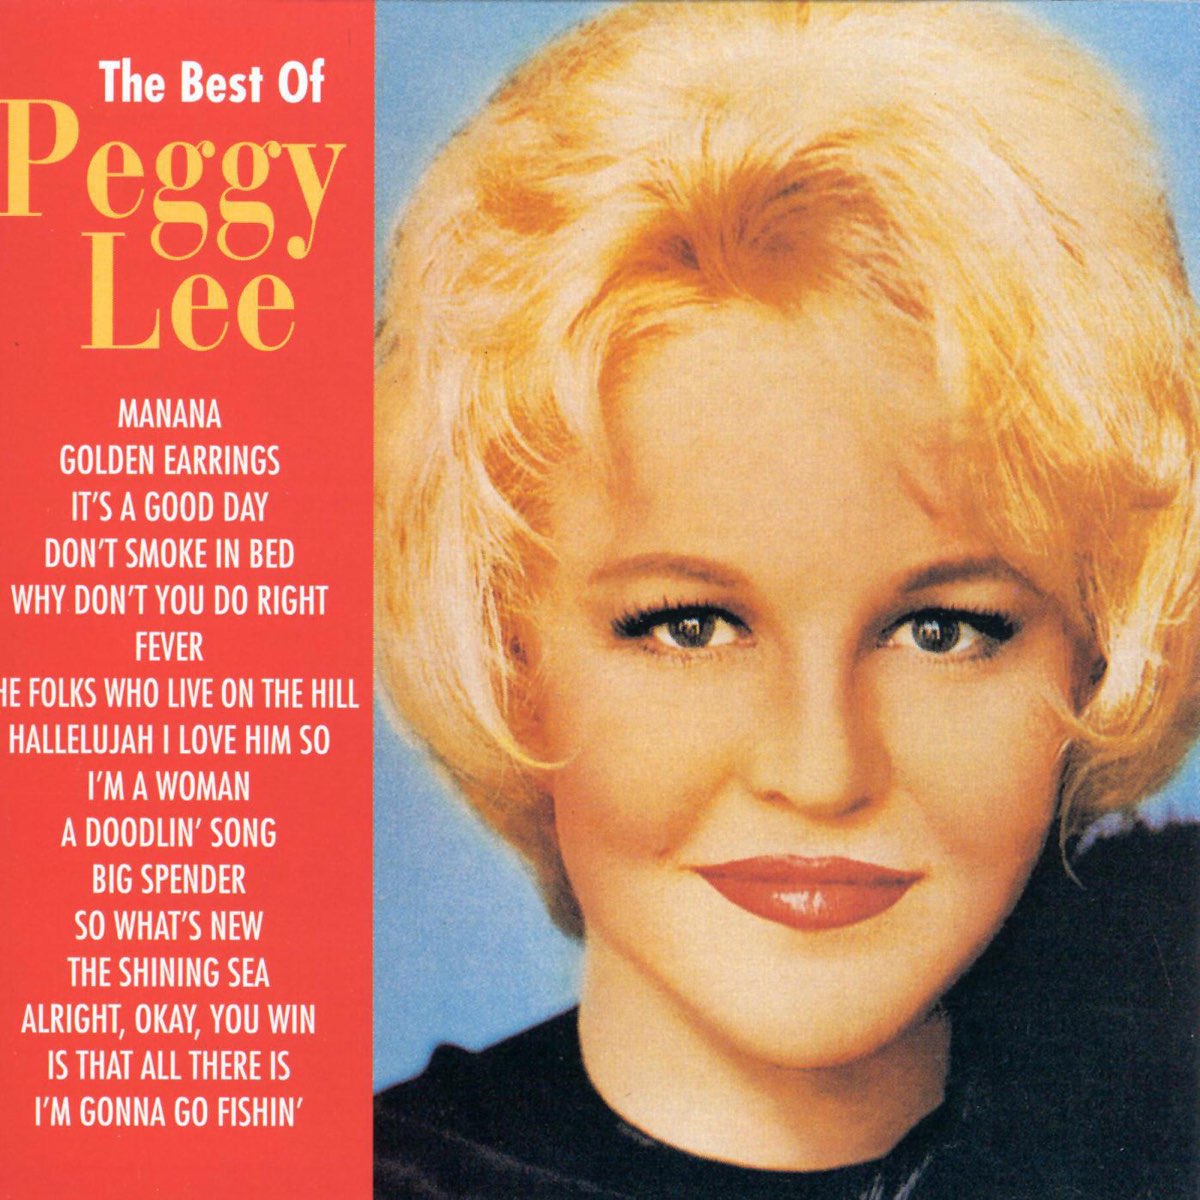 ‎The Best of Peggy Lee by Peggy Lee on Apple Music